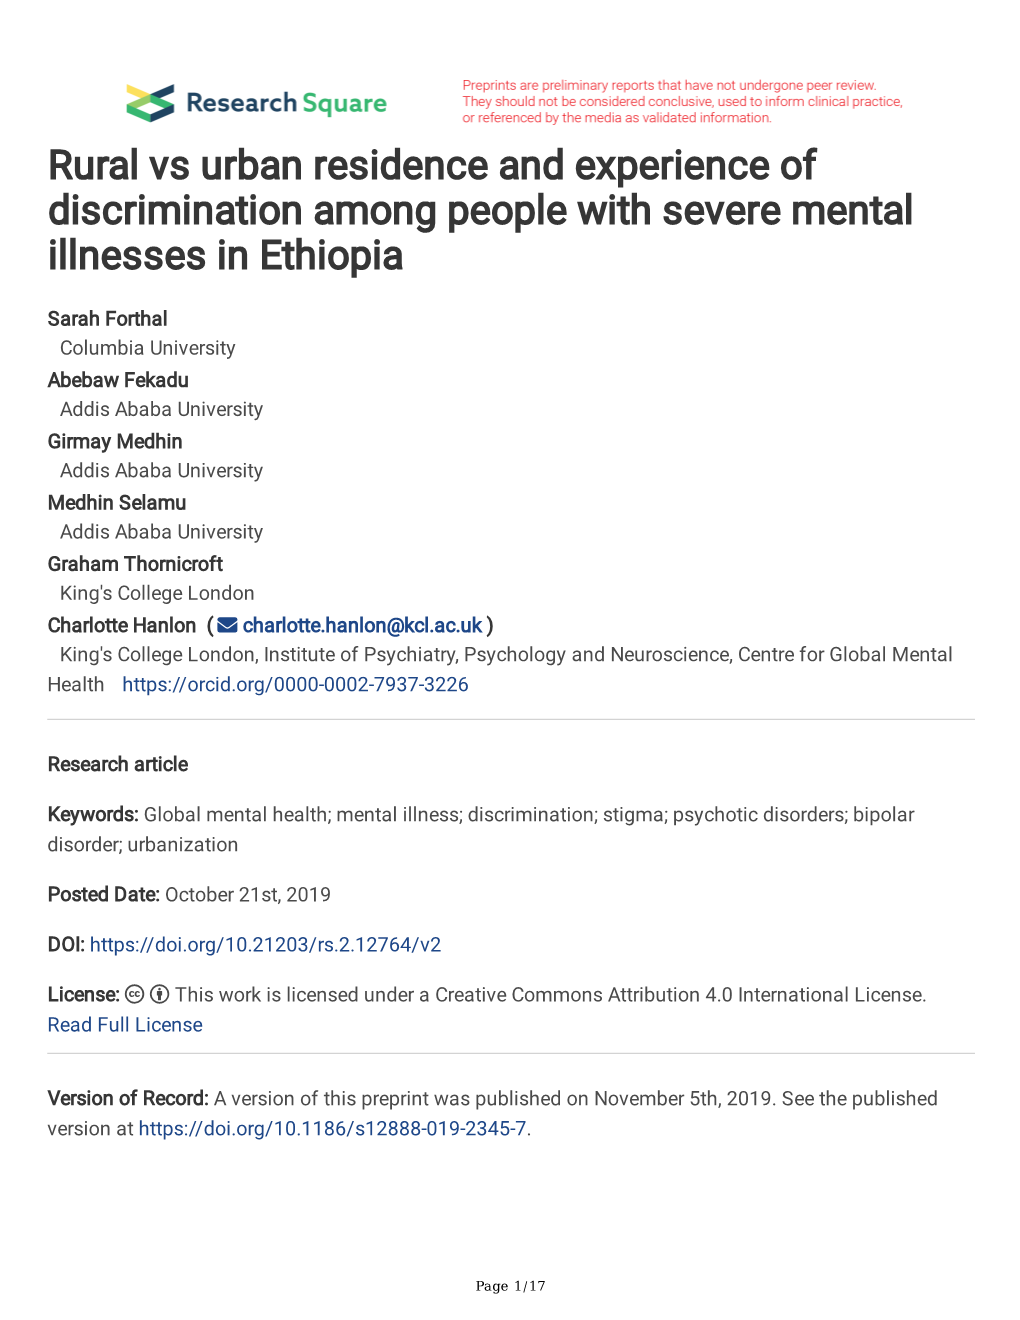 Rural Vs Urban Residence and Experience of Discrimination Among People with Severe Mental Illnesses in Ethiopia